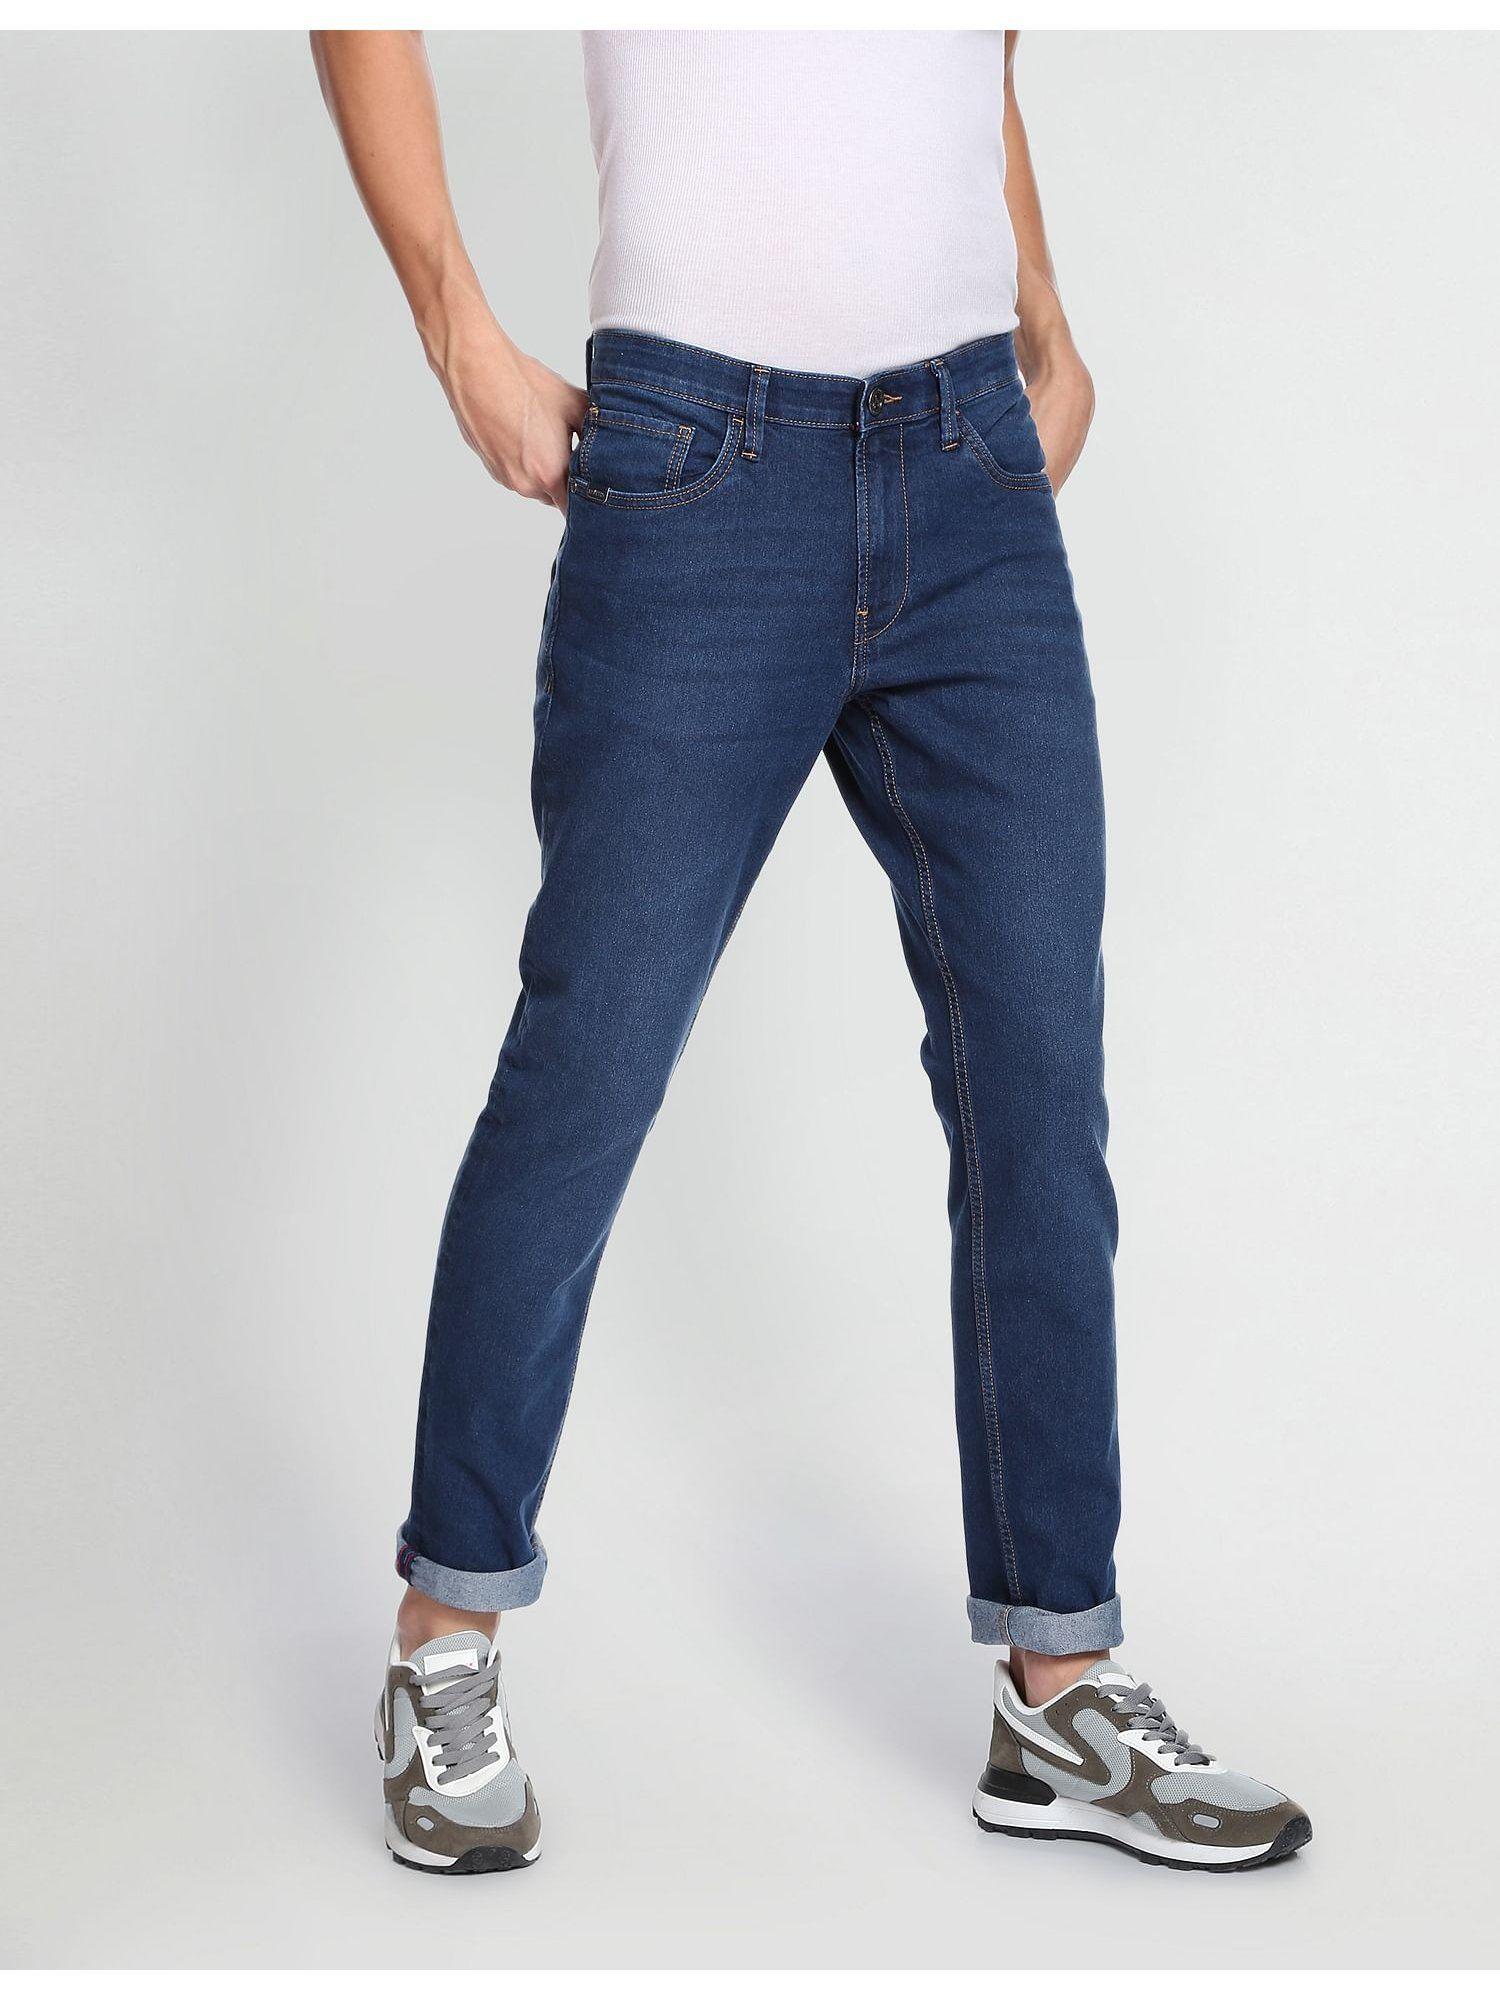 sports light weight slim fit jeans blue